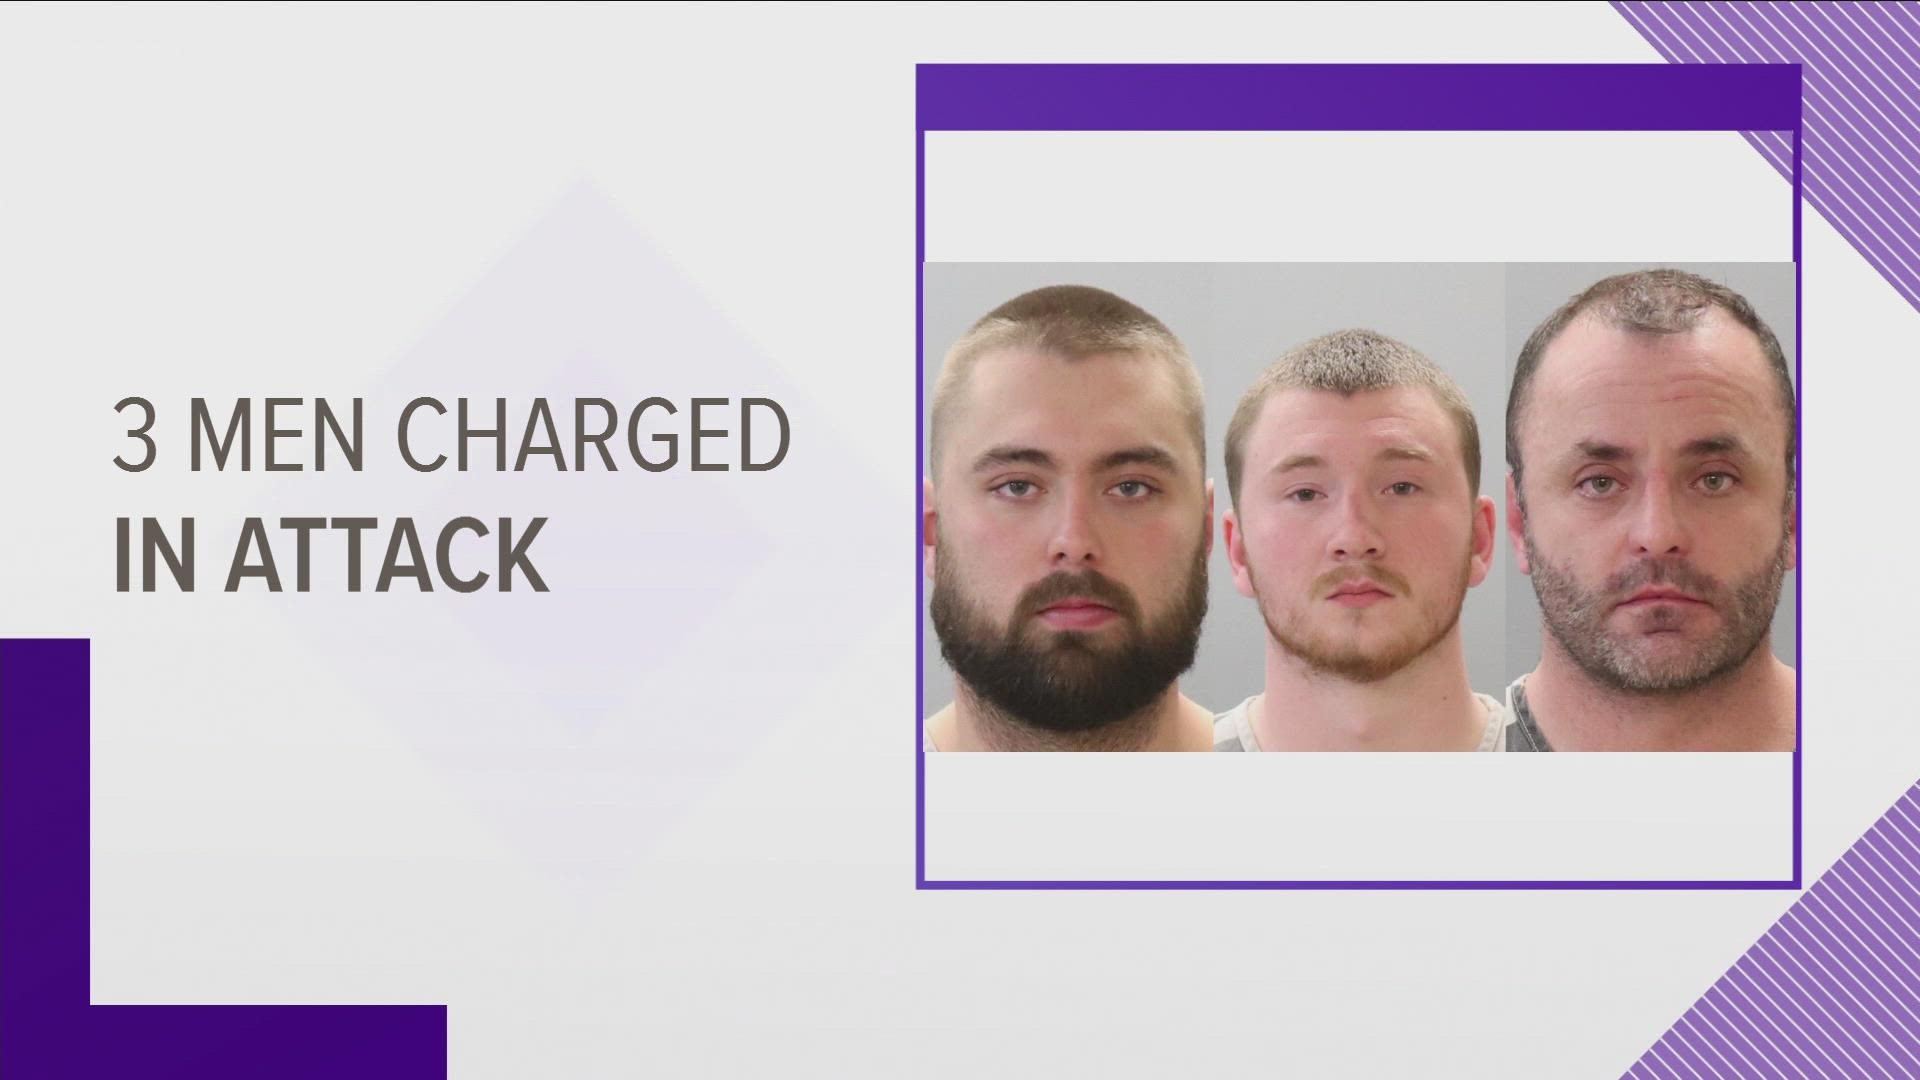 Steven Tanner, Dylan Kiser and Kenneth Holmes have each been charged with two counts of assault with bodily injury, according to the Knoxville Police Department.